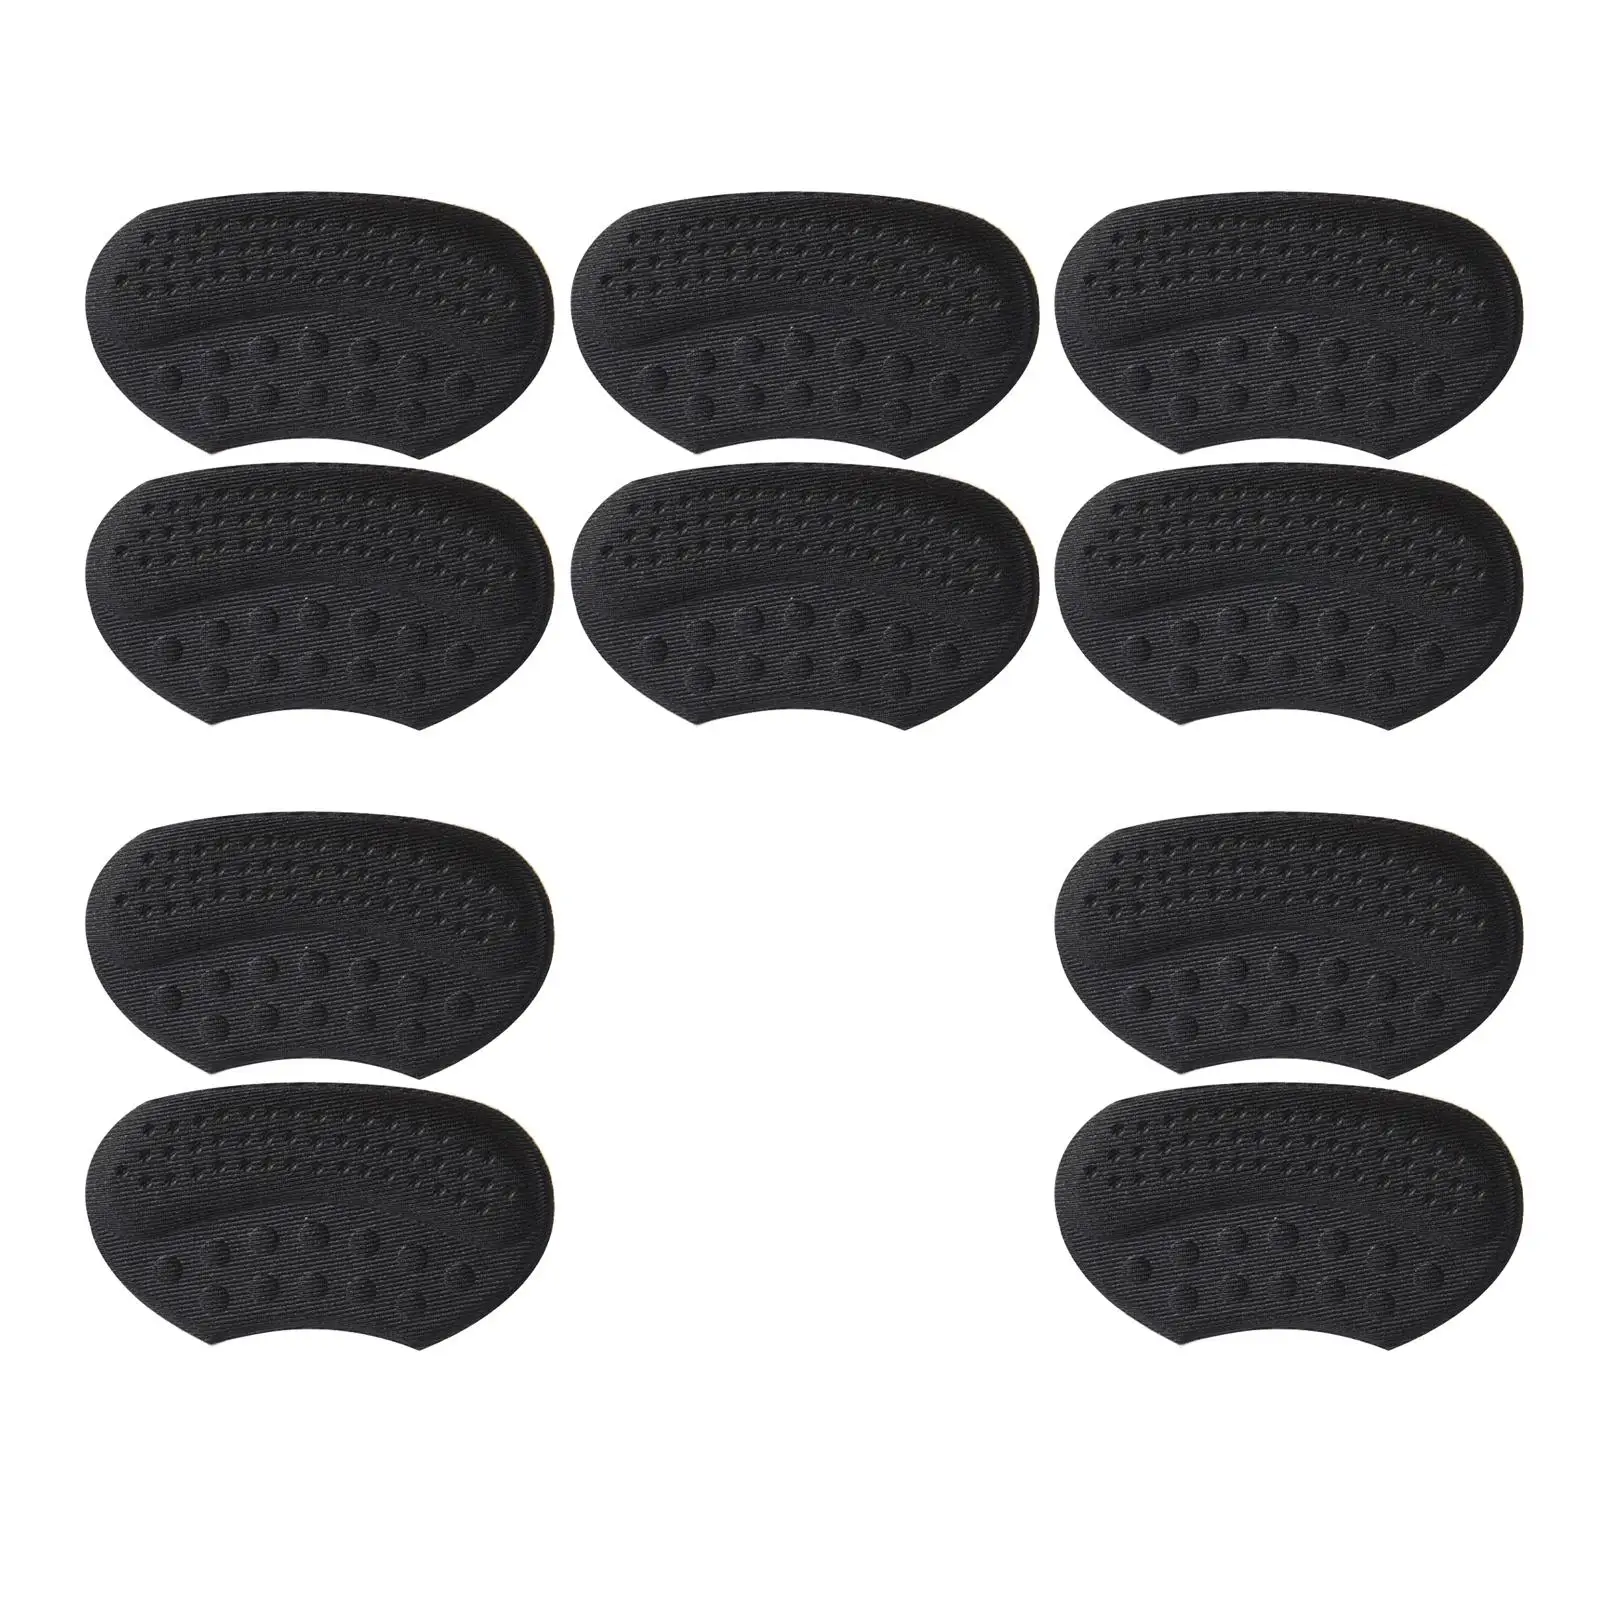  Cushion Pads Comfortable Durable Wear Resistant Heel Protector